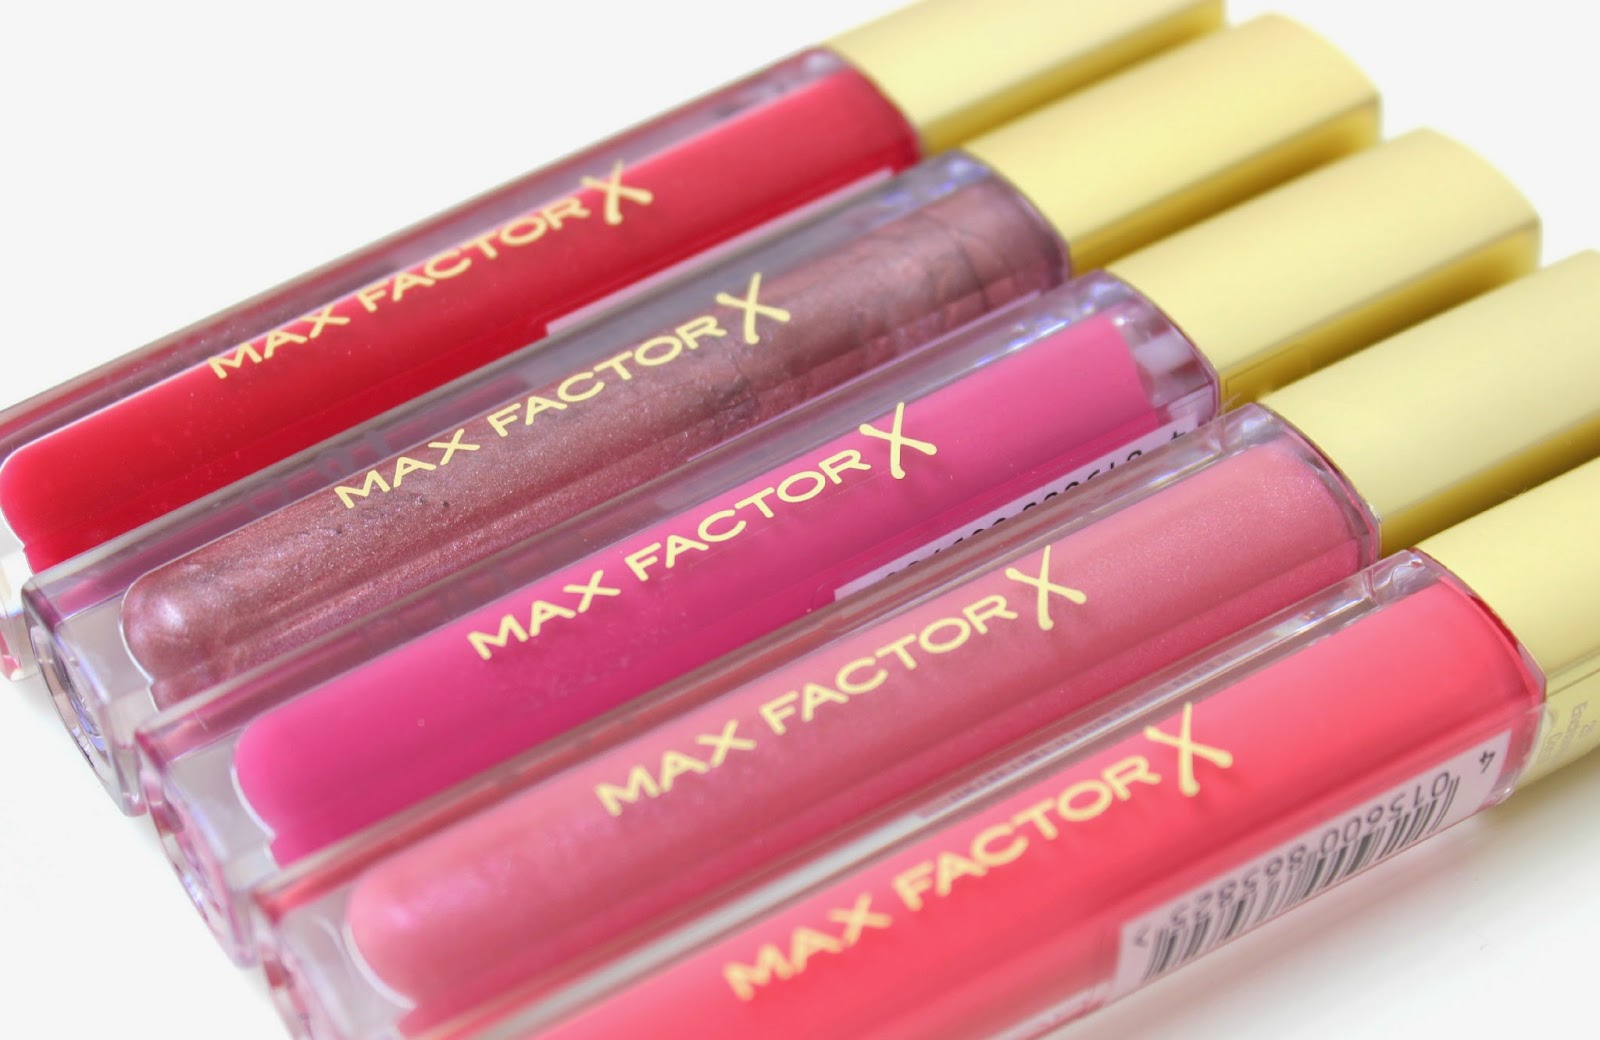 A full review of the Max Factor Colour Elixir Lip Gloss range, delving into 5 of the 9 available shades.